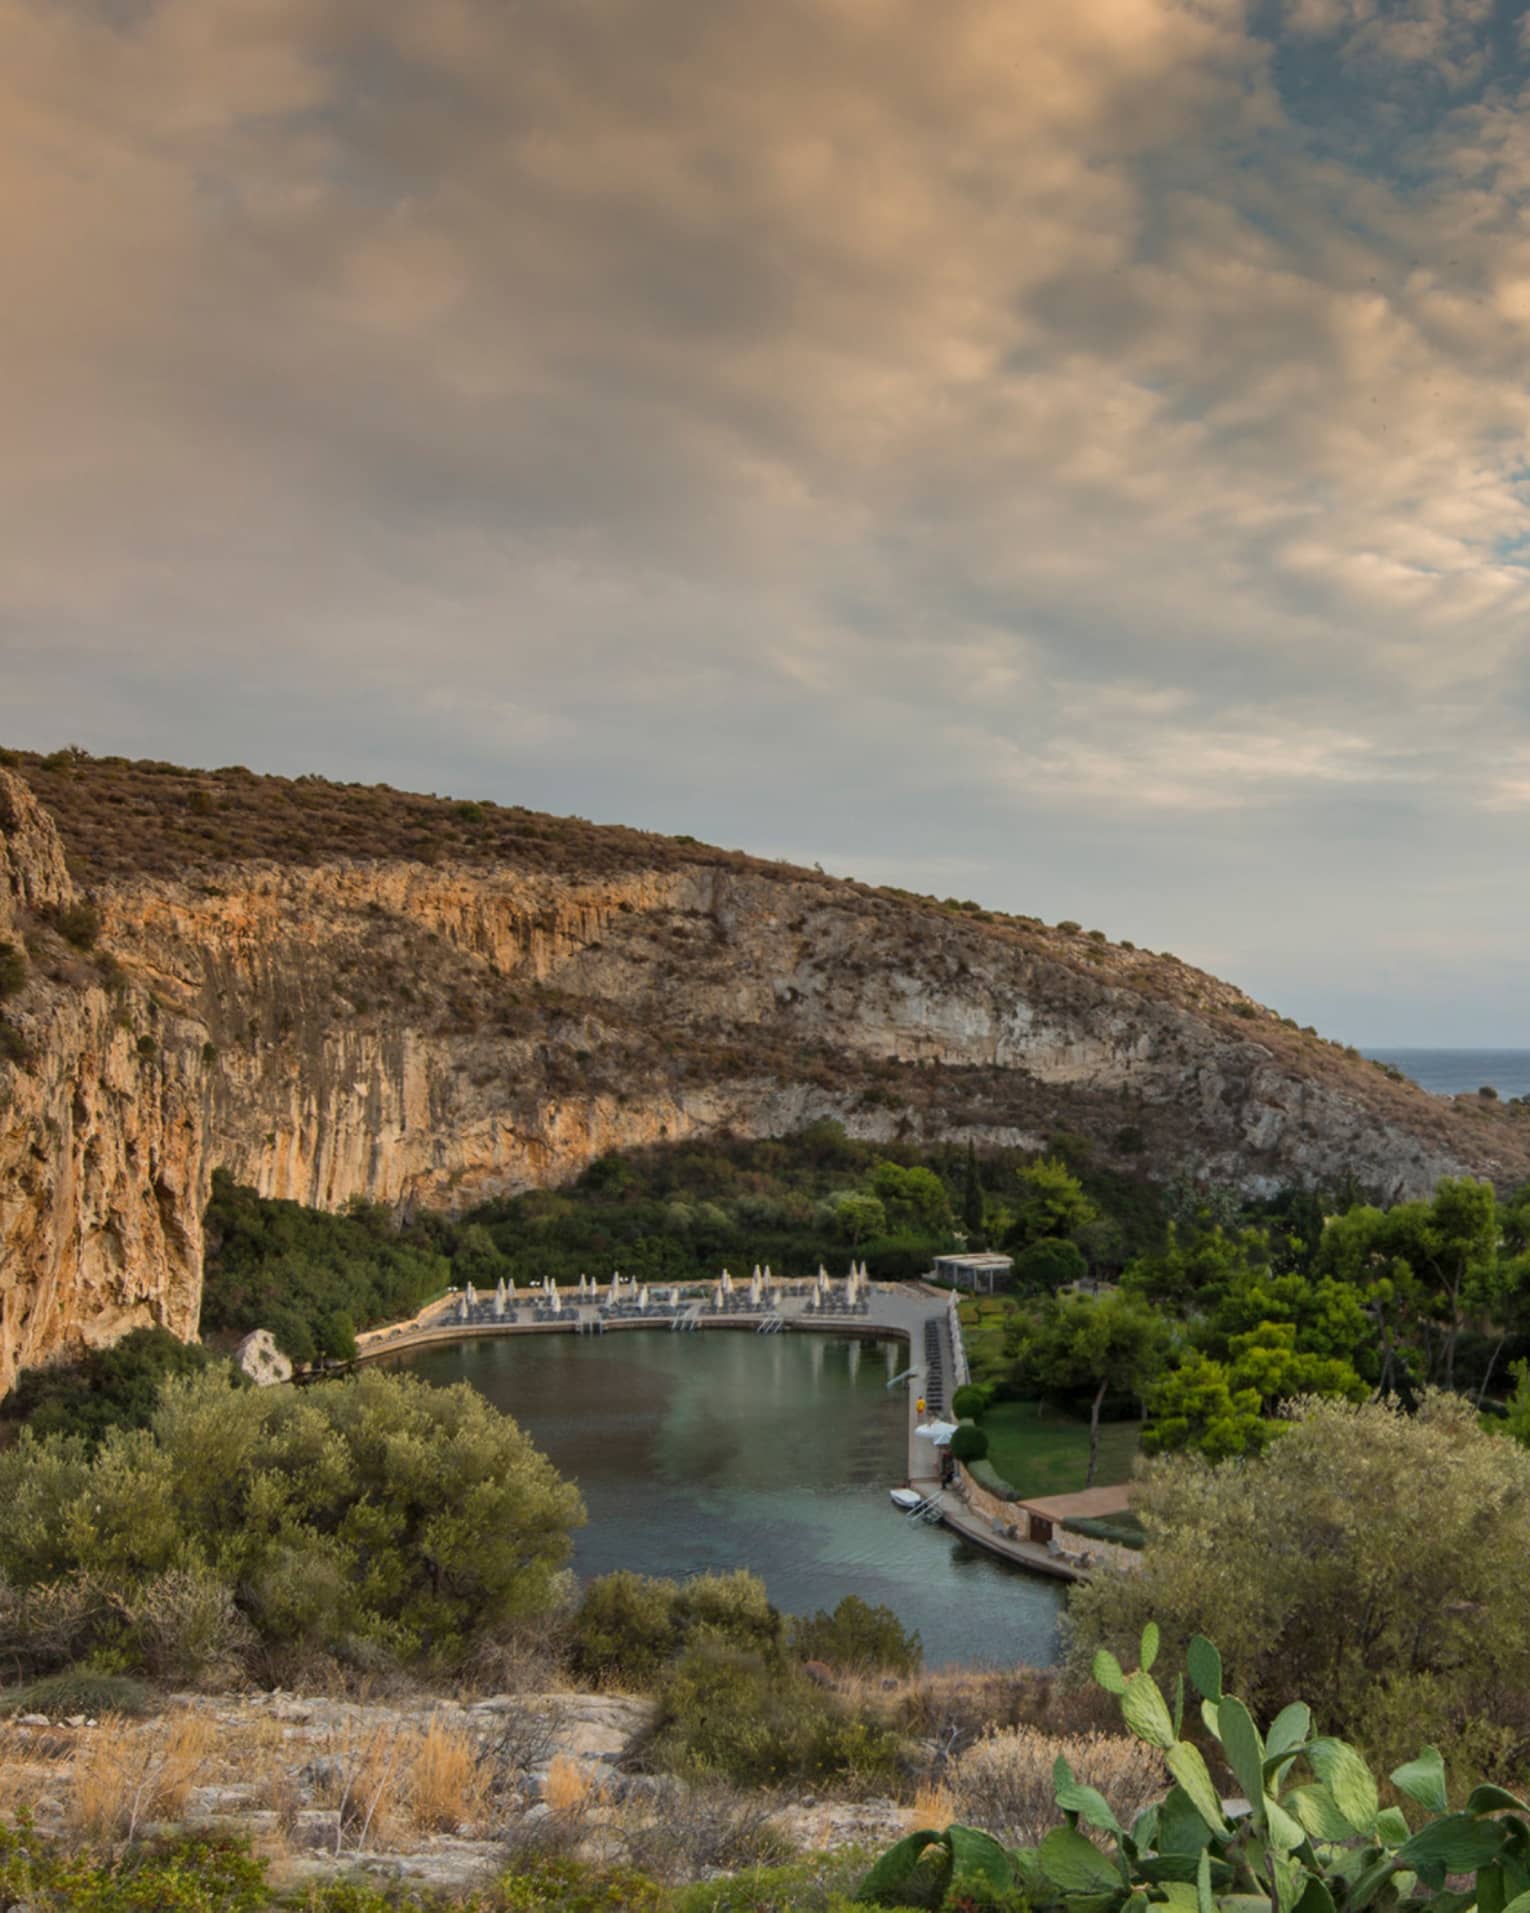 View of Vouliagmeni with rocky hill, green trees and shrubs overlooking ocean